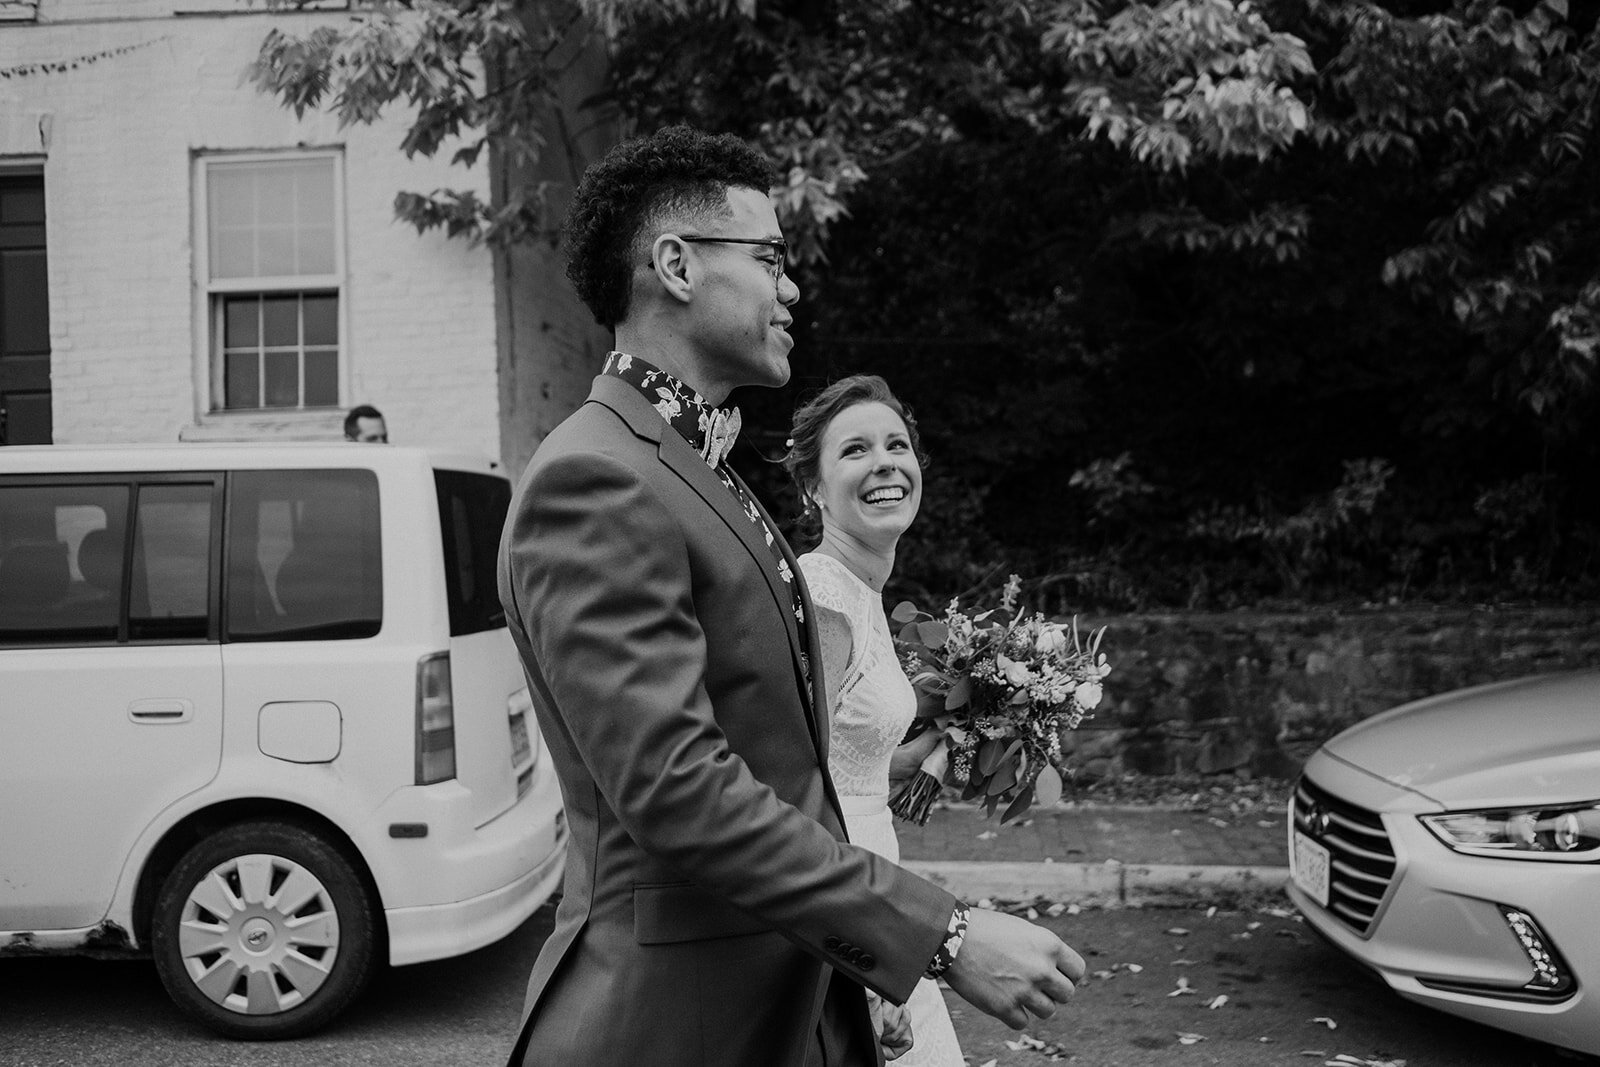 A bride and groom share a laugh as they walk down the street in Leesburg, VA.